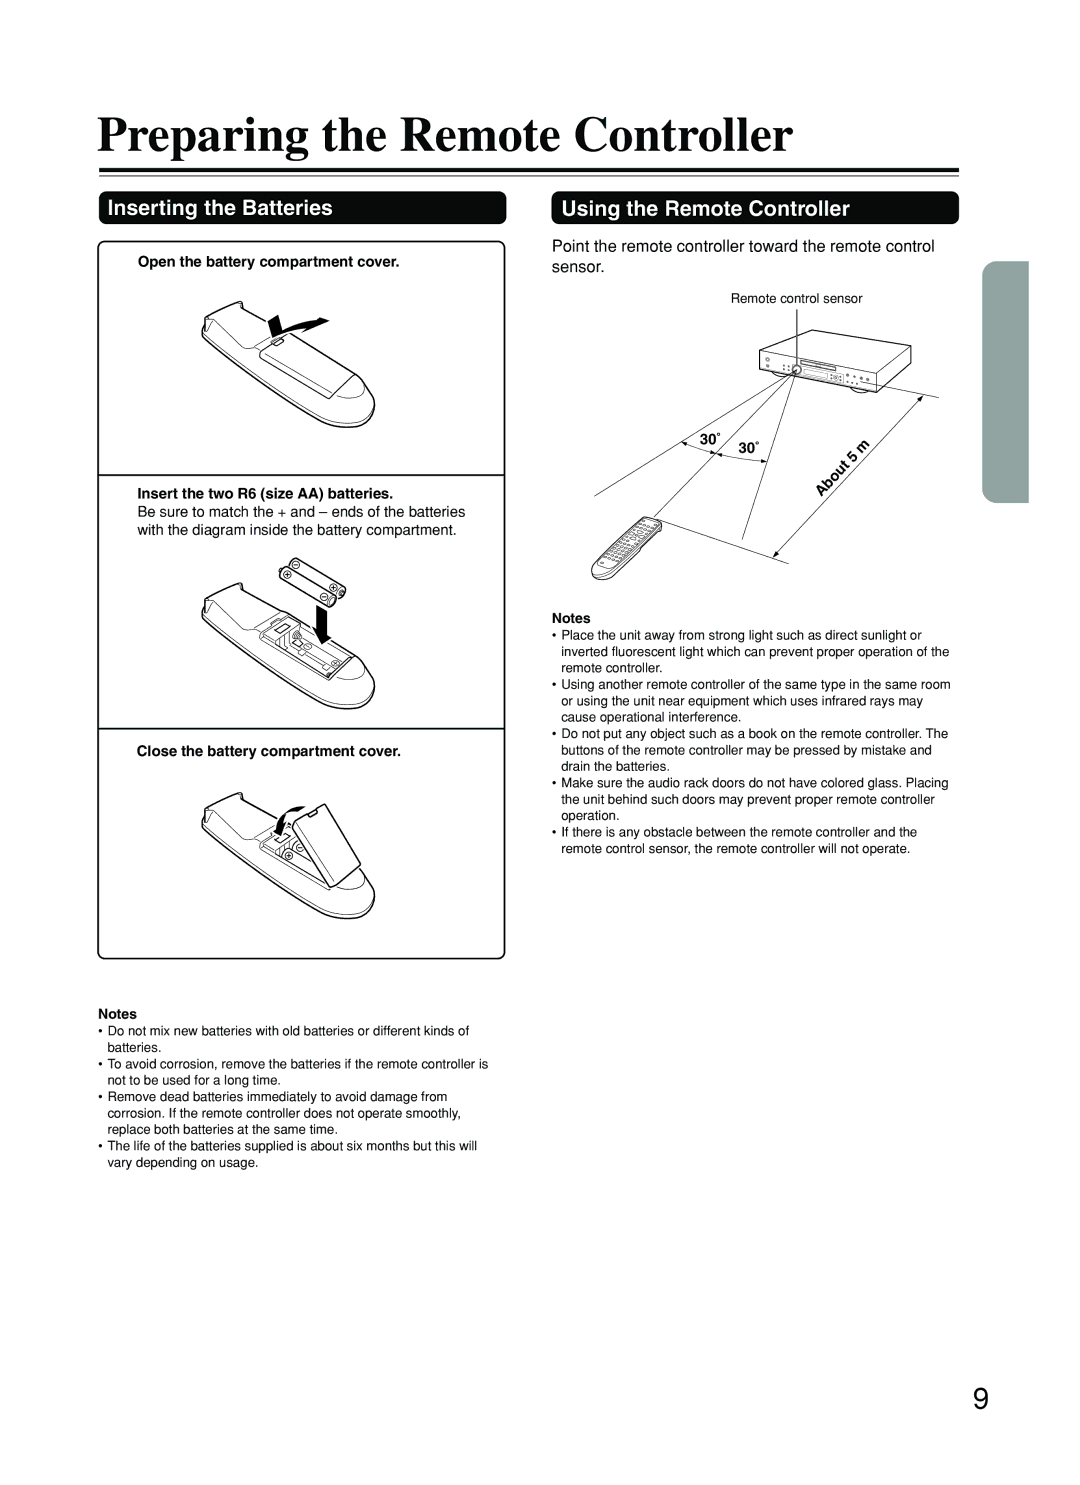 Integra DPS-5.2 instruction manual Preparing the Remote Controller, Inserting the Batteries, Using the Remote Controller 